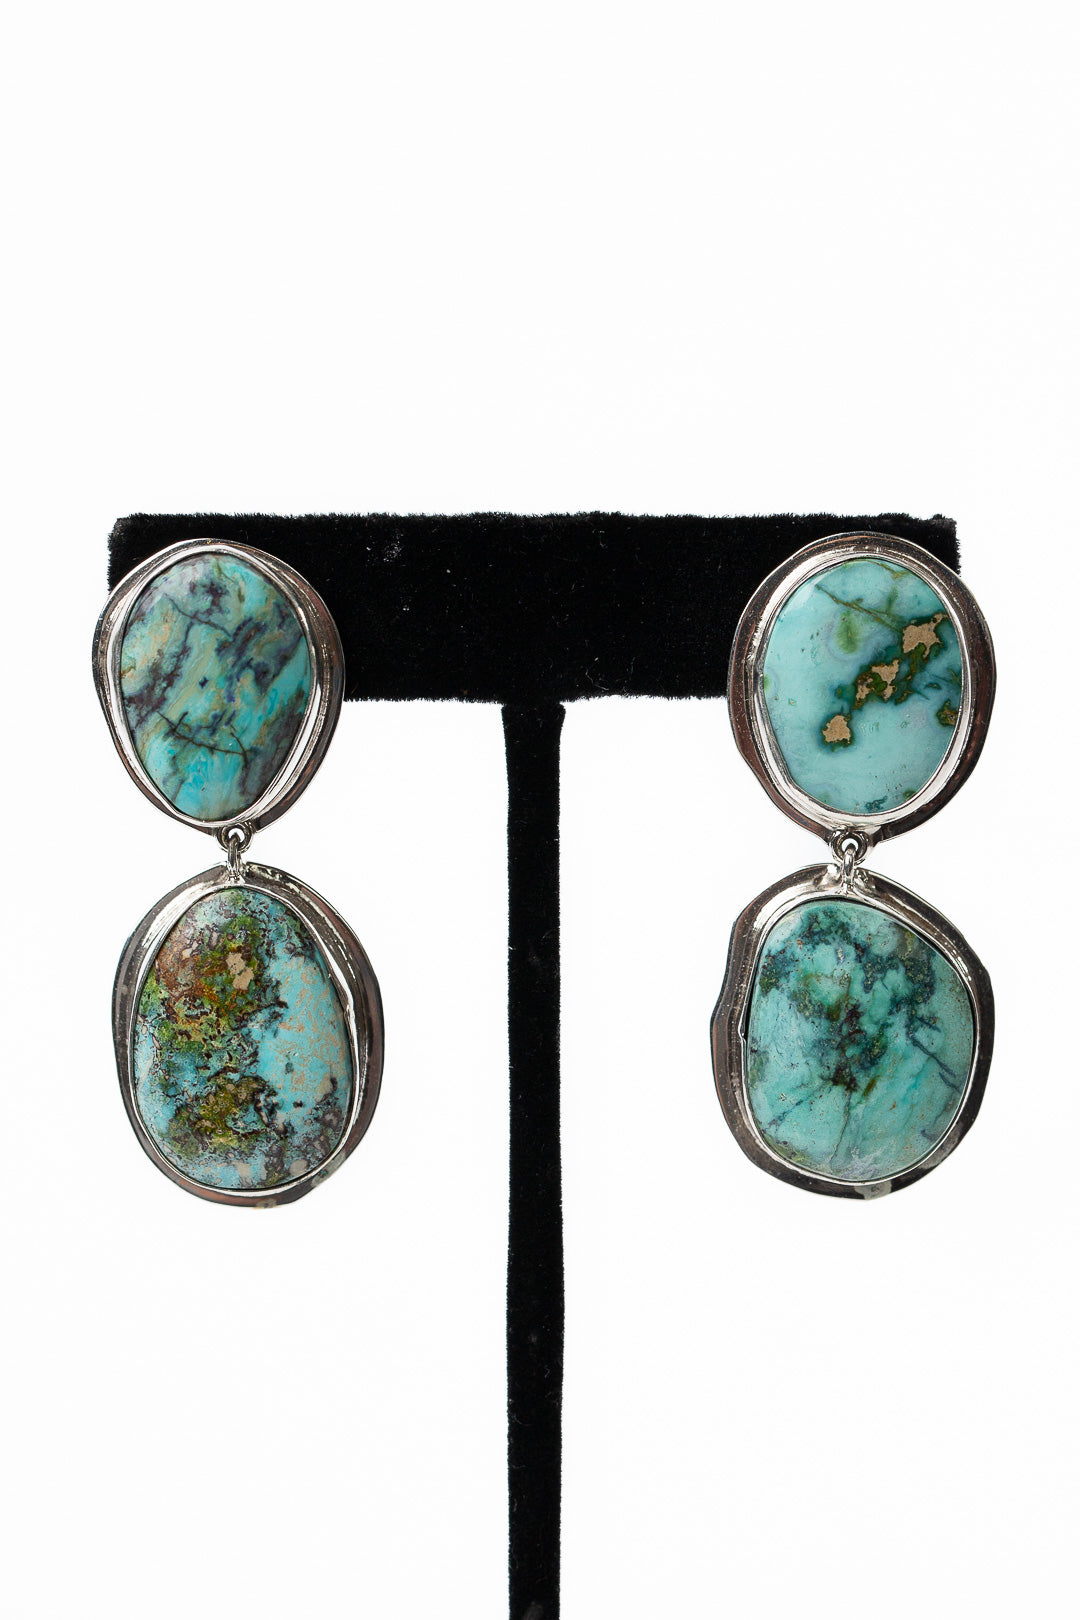 Federico Handcrafted Royston Turquoise Earrings